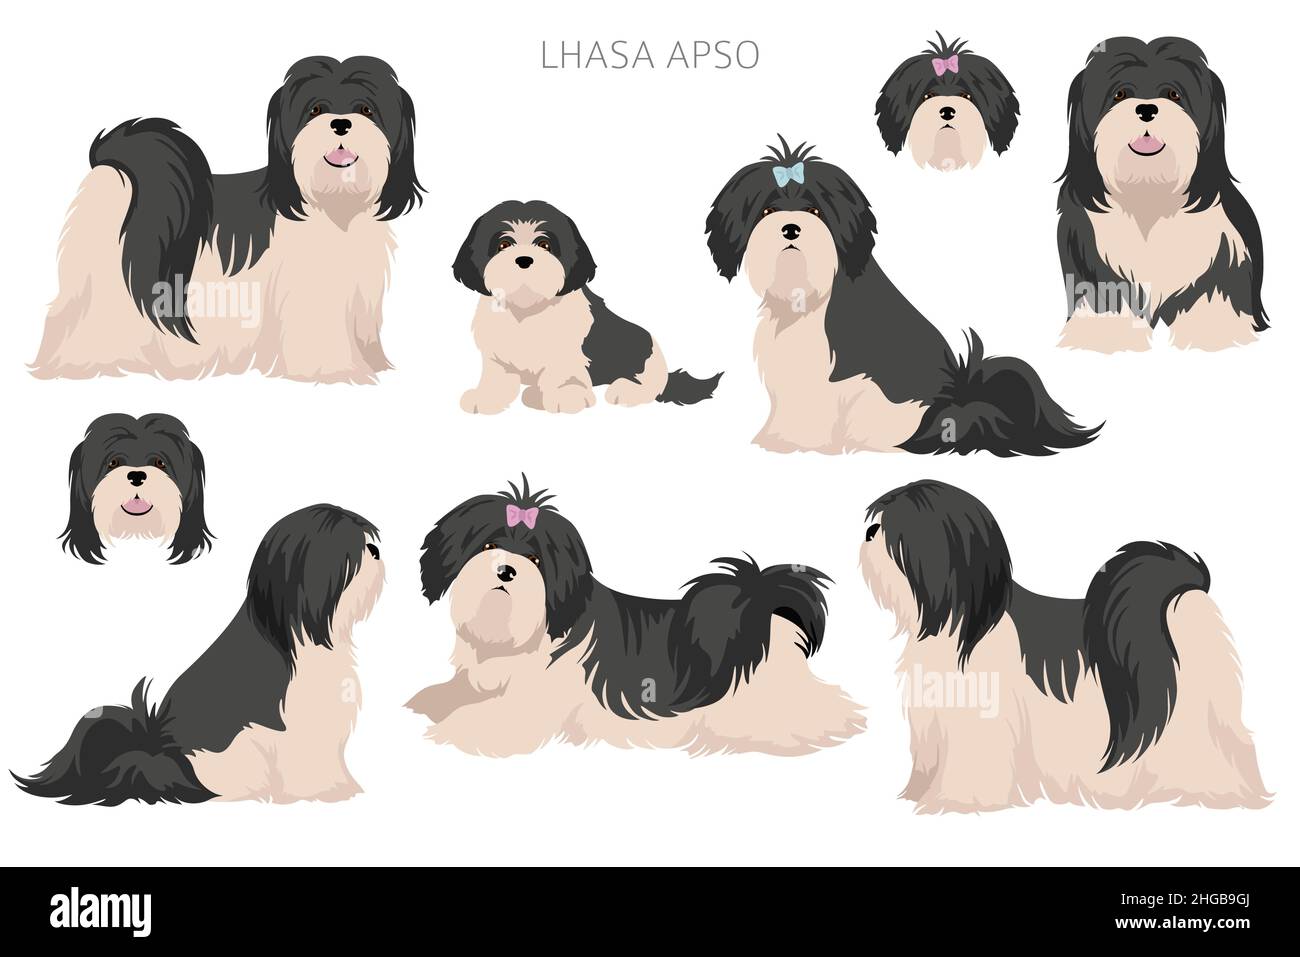 Lhasa Apso clipart. Different poses, coat colors set.  Vector illustration Stock Vector